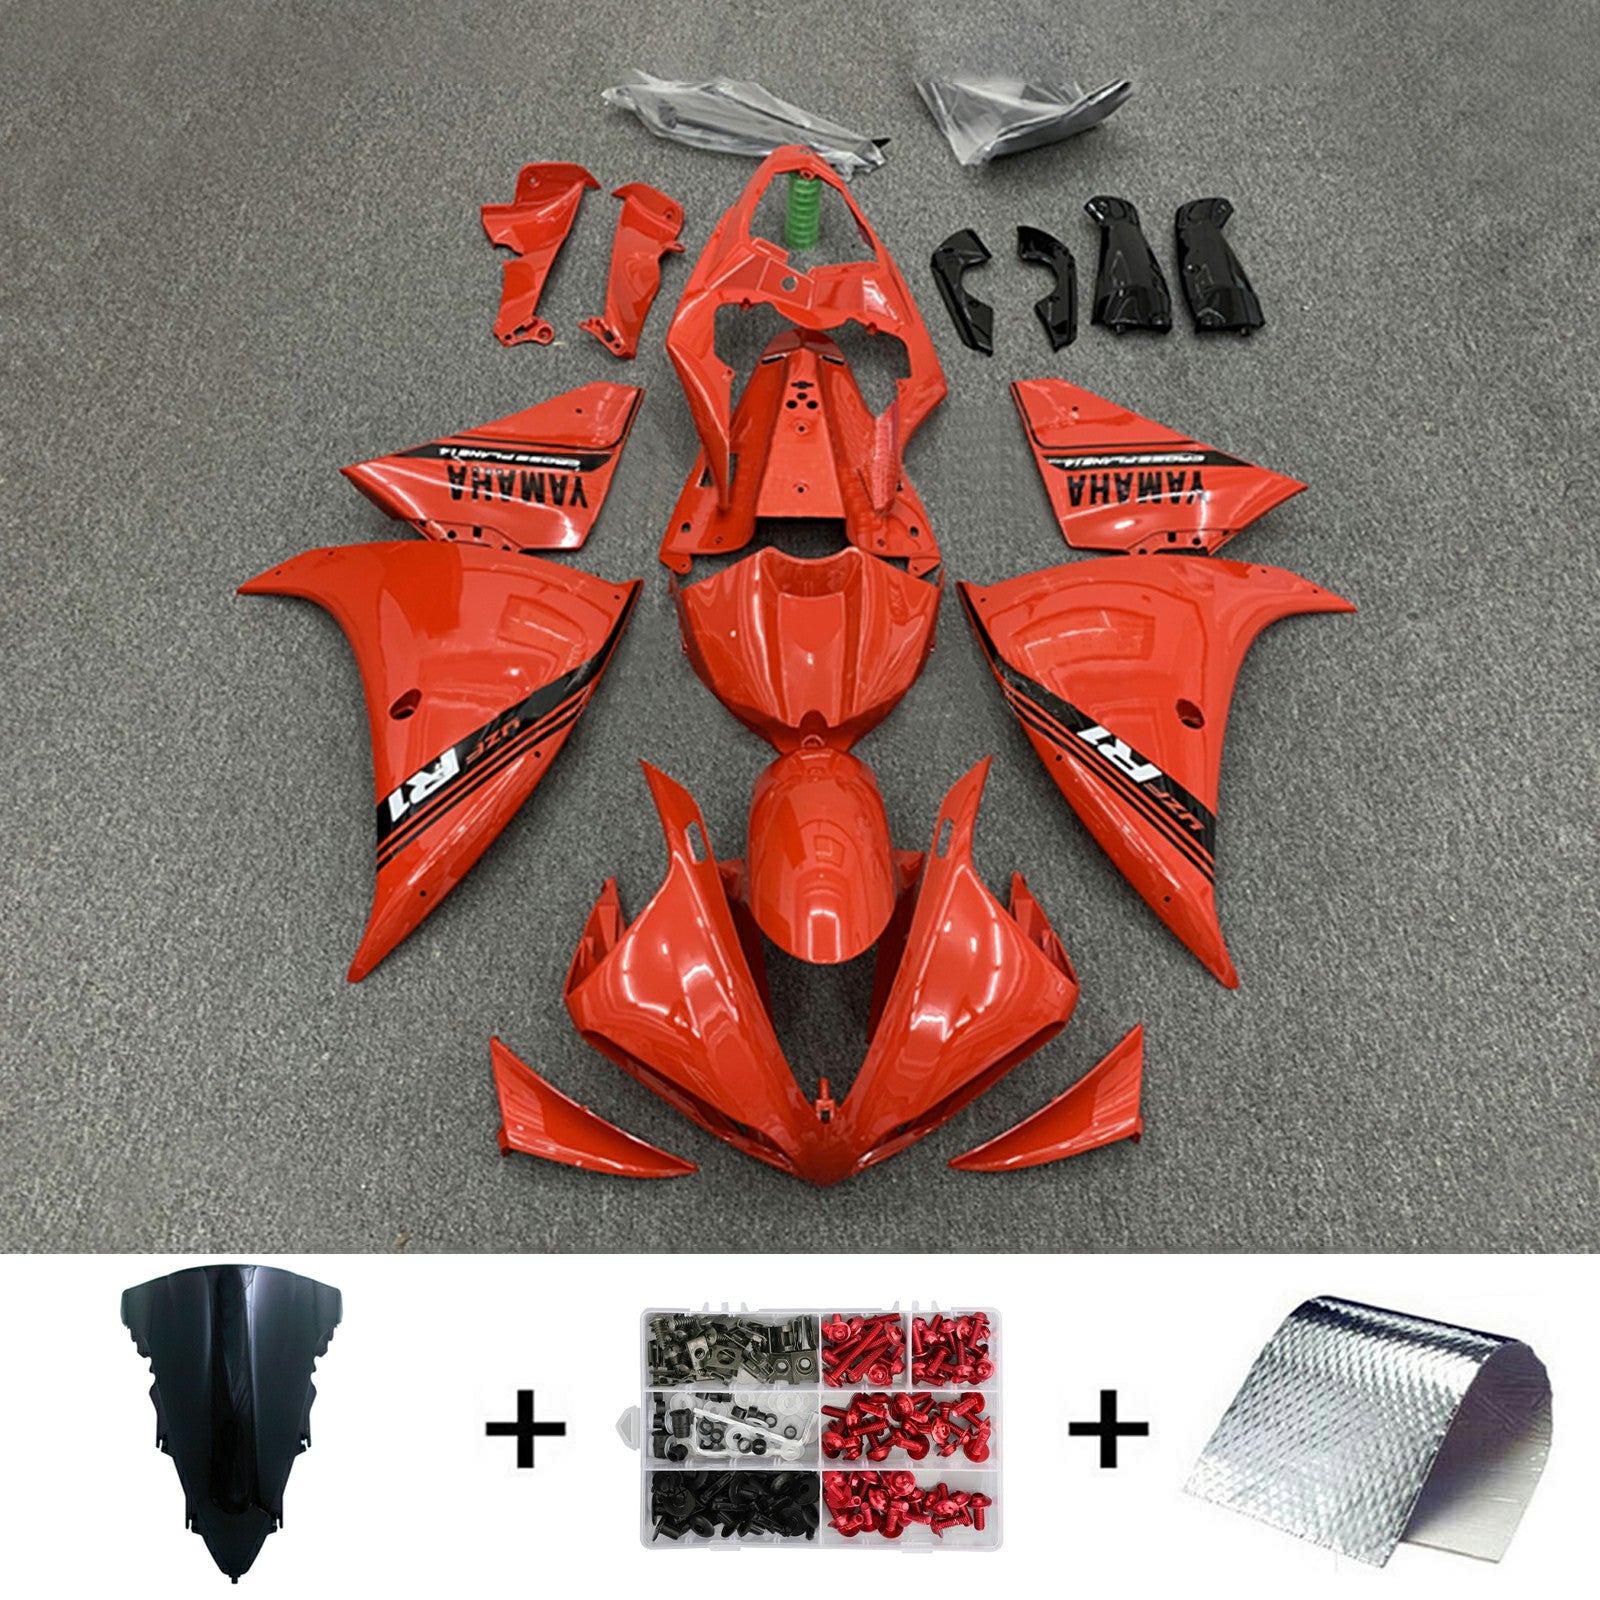 Amotopart 2009-2011 Yamaha YZF 1000 R1 Red with Black Accent Fairing Kit